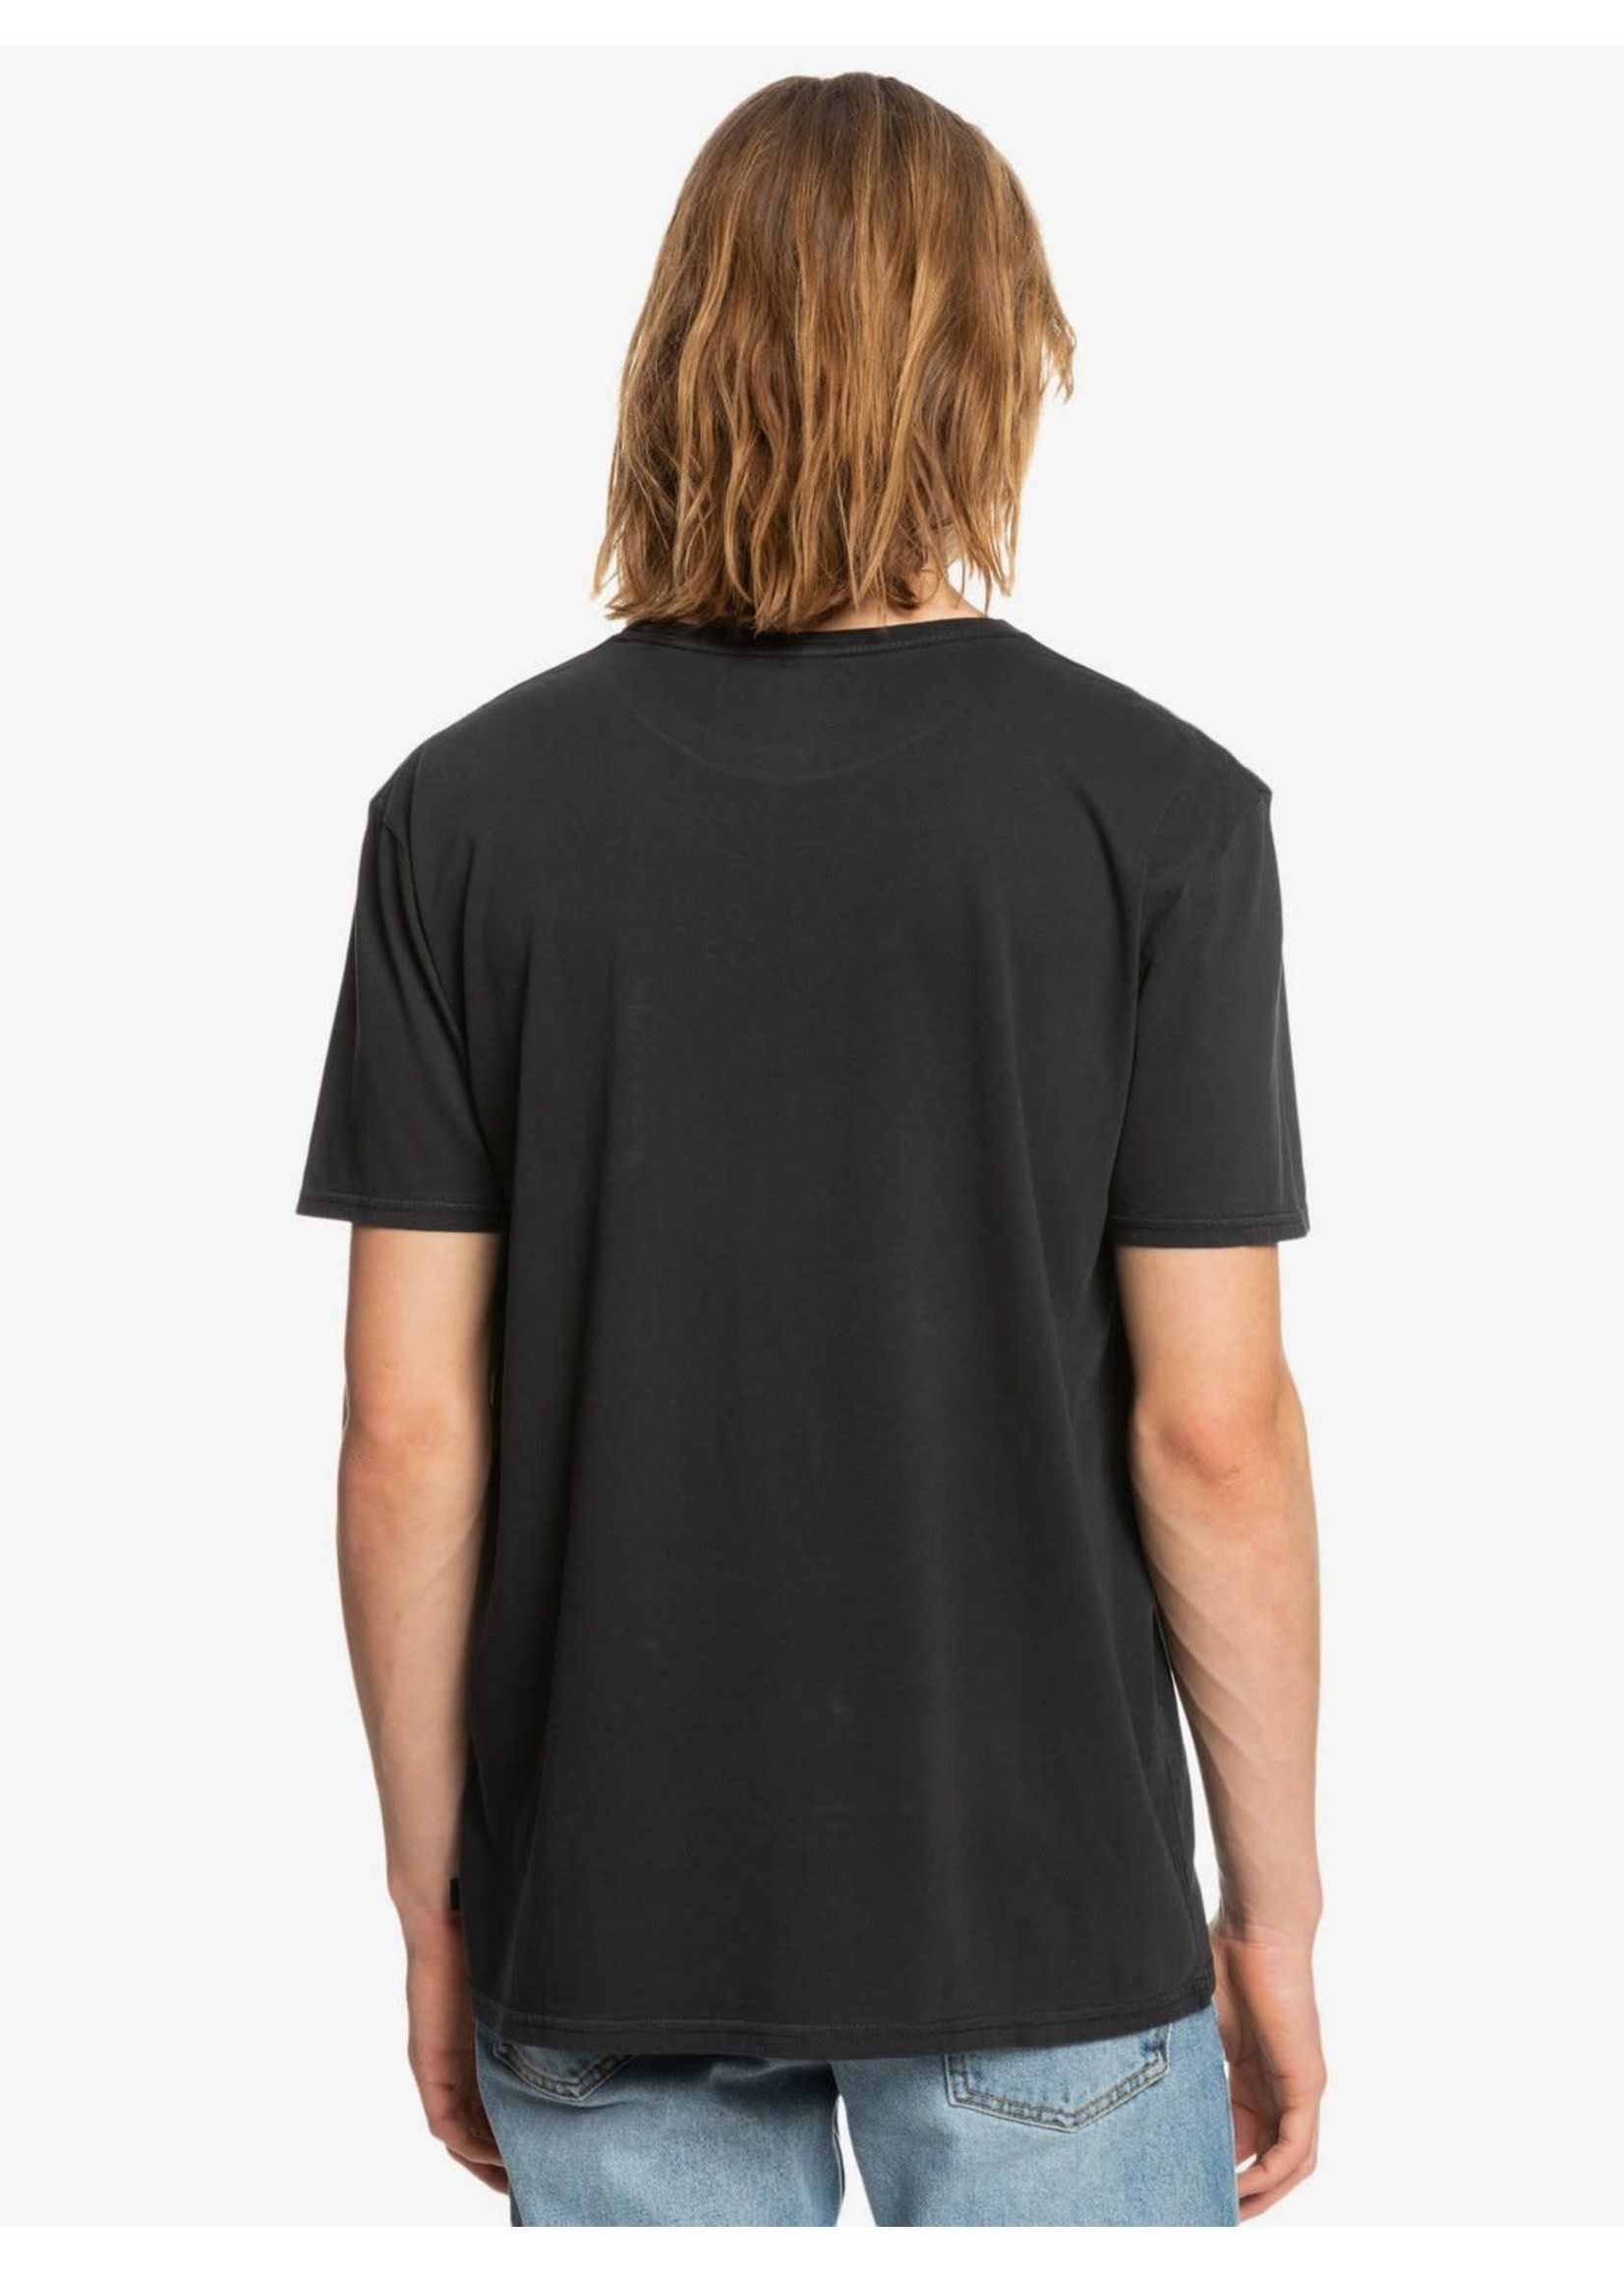 QUIKSILVER T-shirt SUBMISSIONS